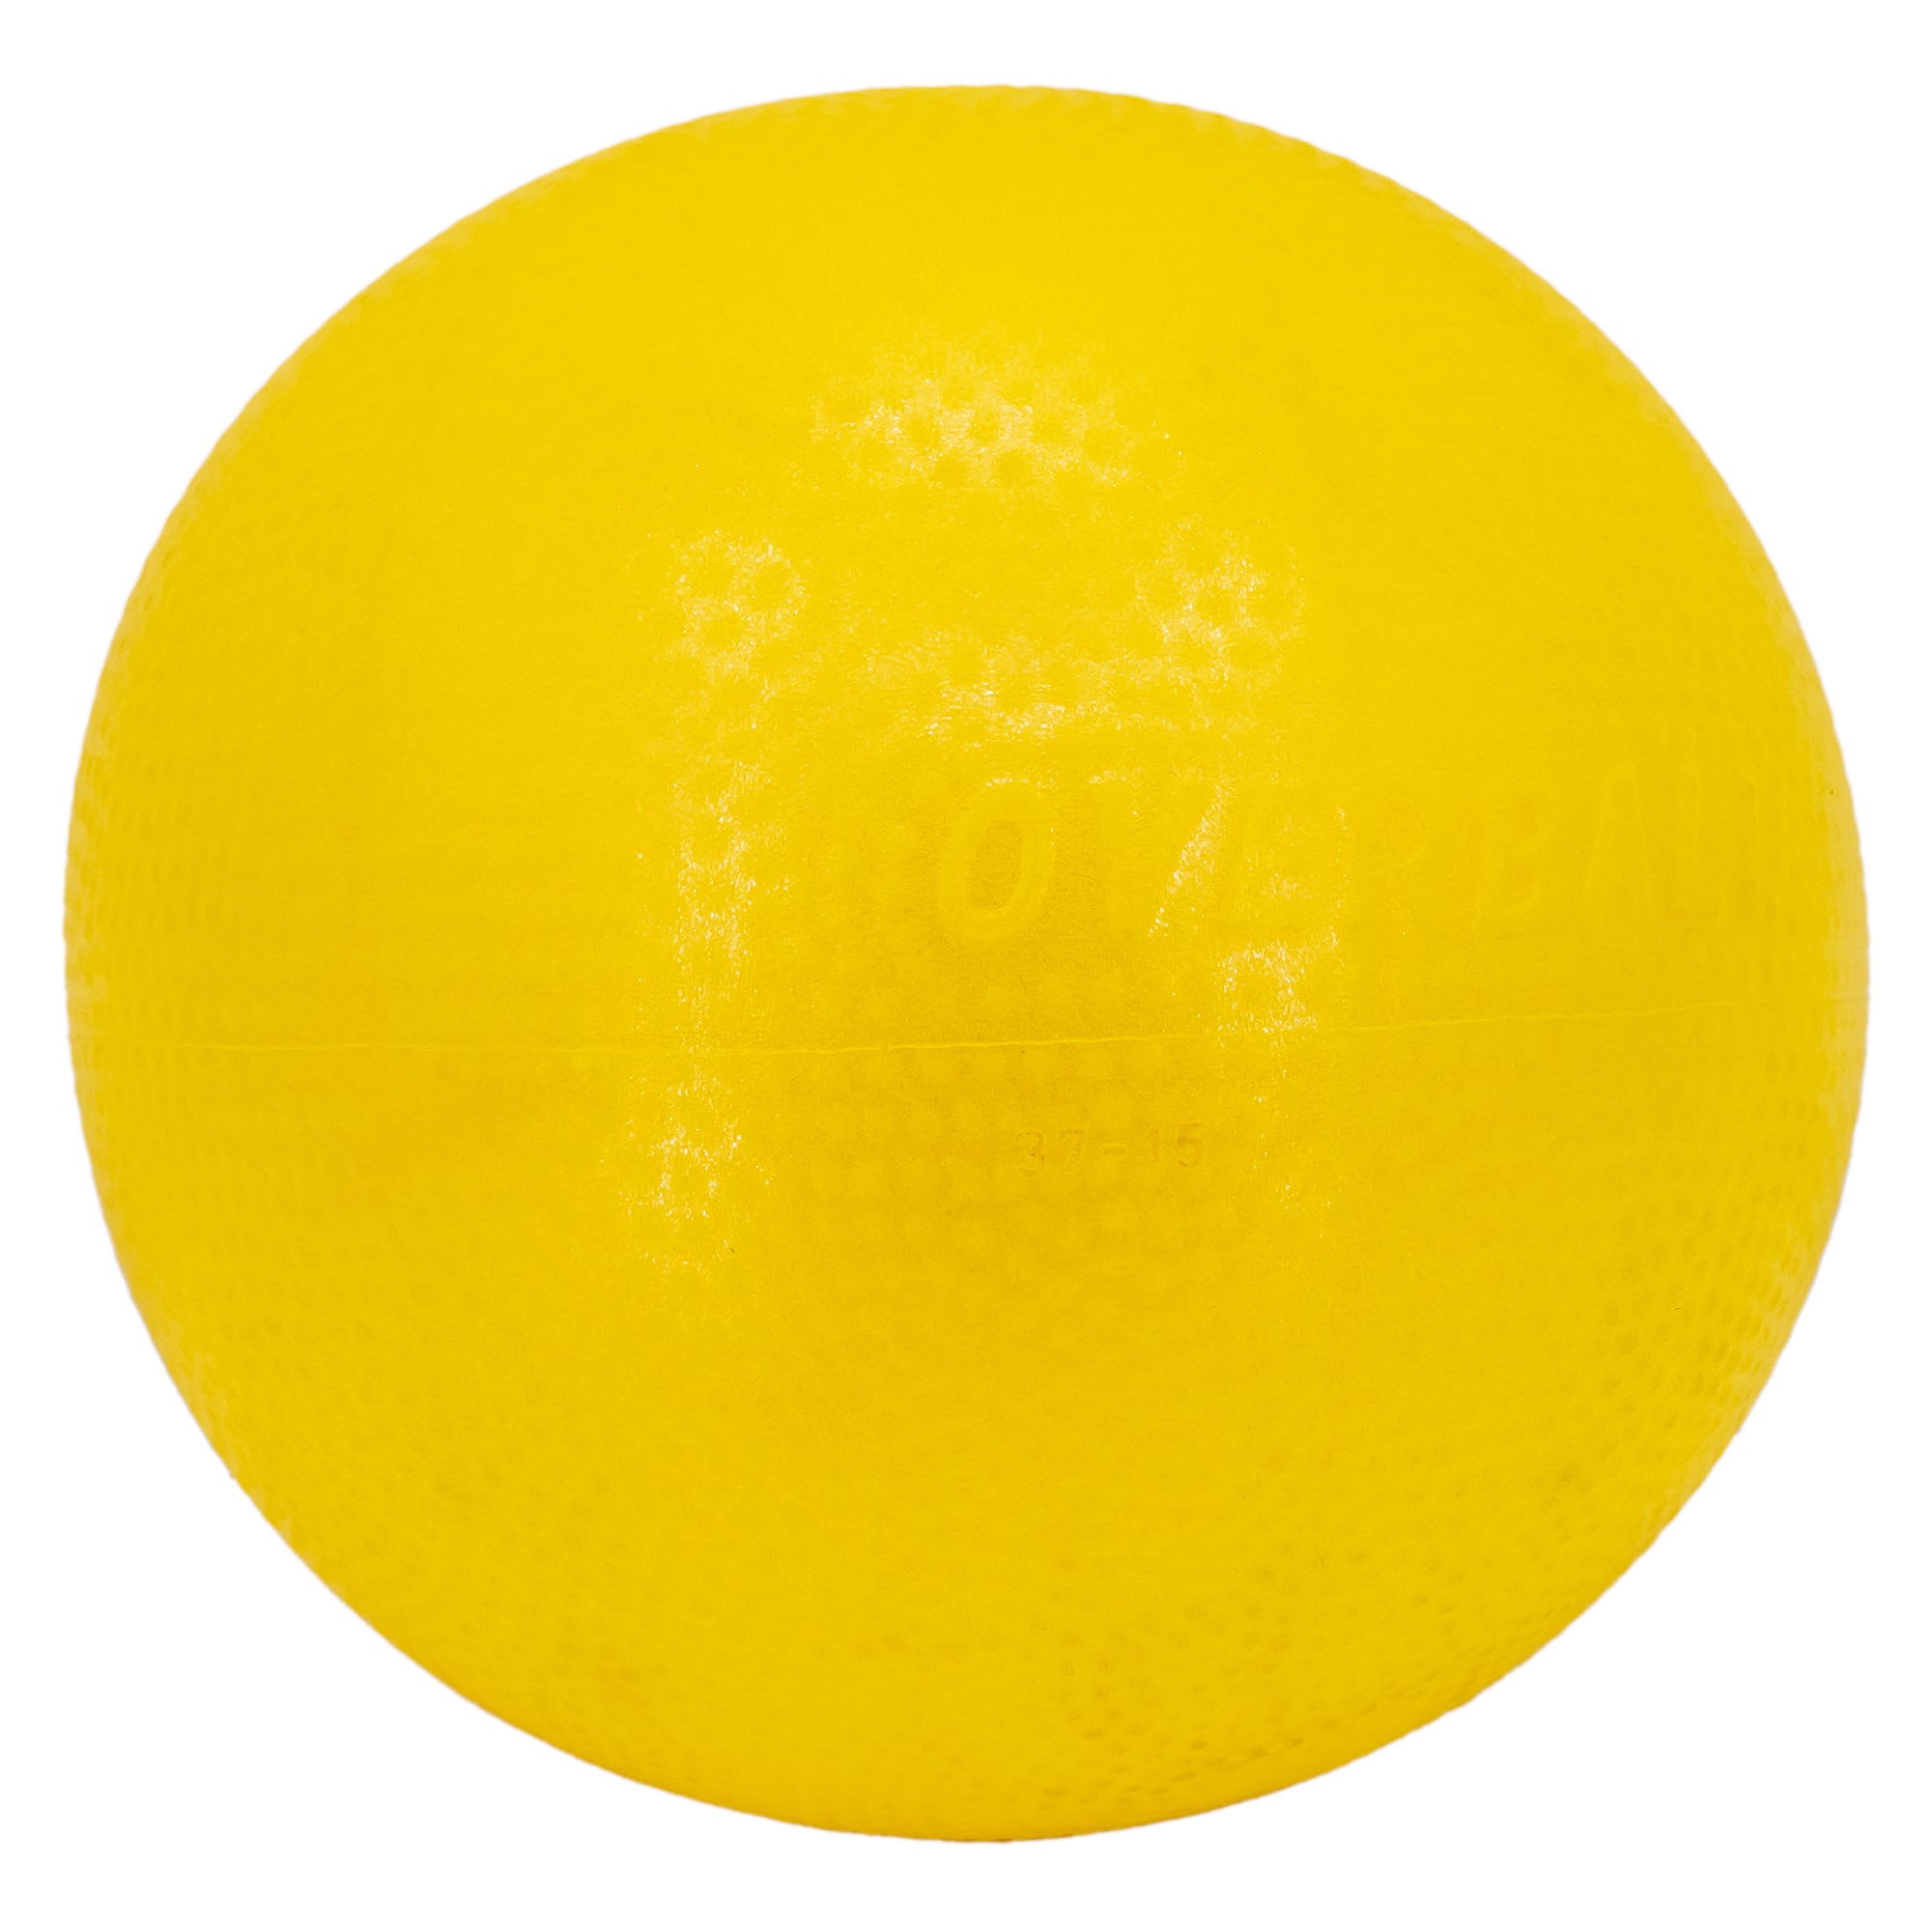 Gymnic Over Ball in yellow. The ball has a slight bumpy texture. The words over ball are embossed on the ball.